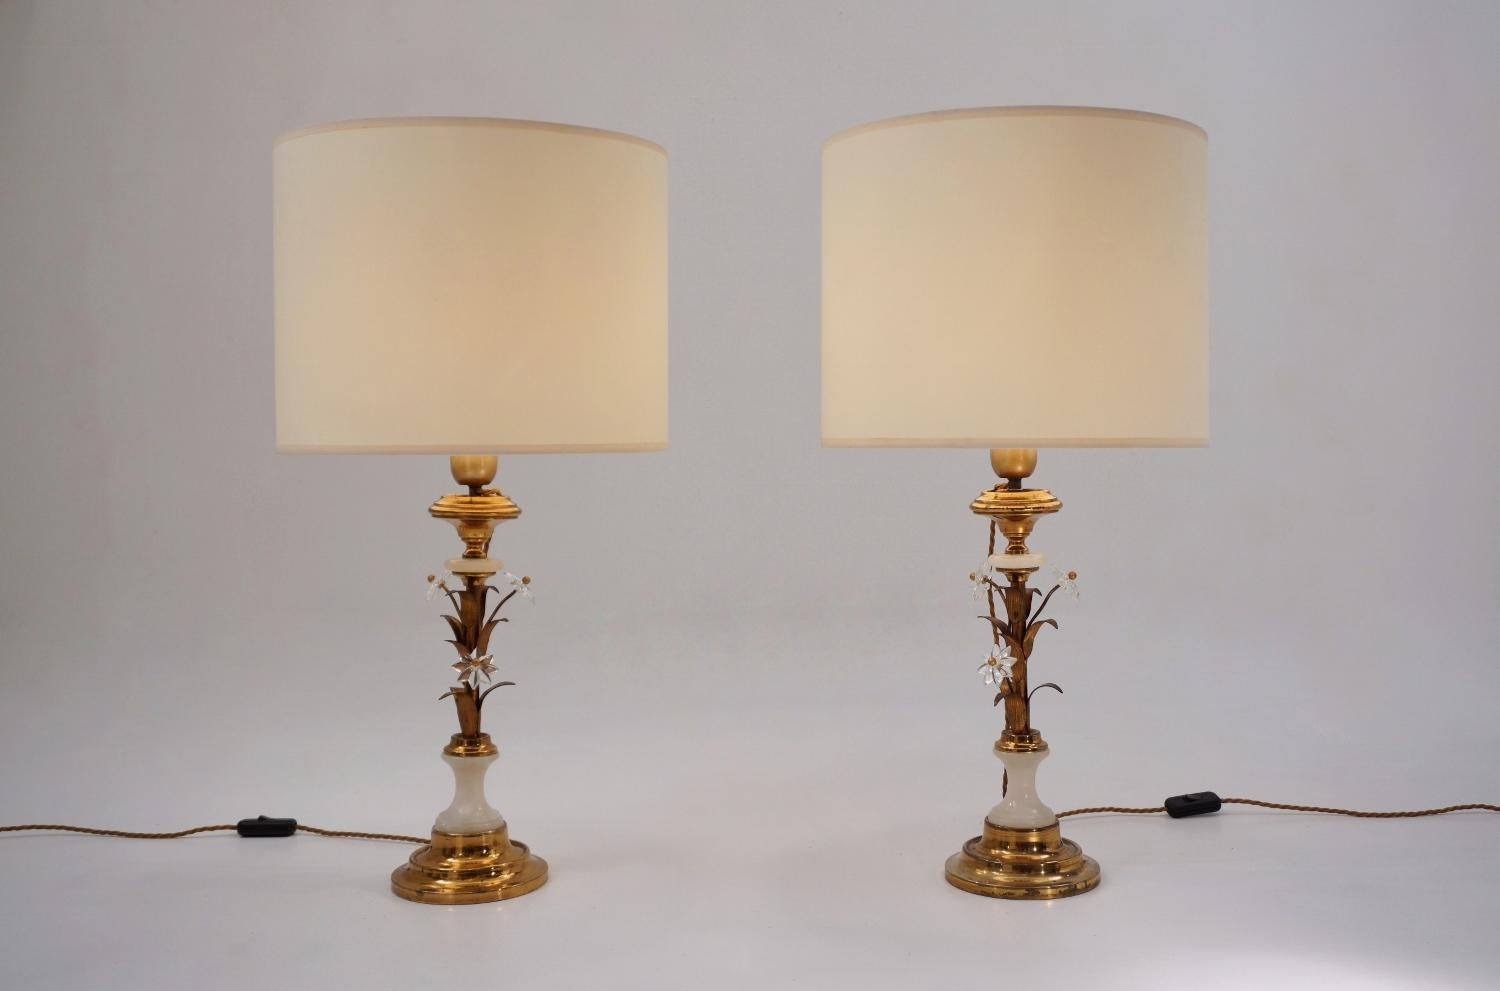 Pair of Banci Firenze Florentine tole gold gilt table lamps, crystal flowers on alabaster columns, circa 1950s, Italian.
These table lamps have been gently cleaned while respecting the antique patina. Both are newly rewired, earthed, fully working